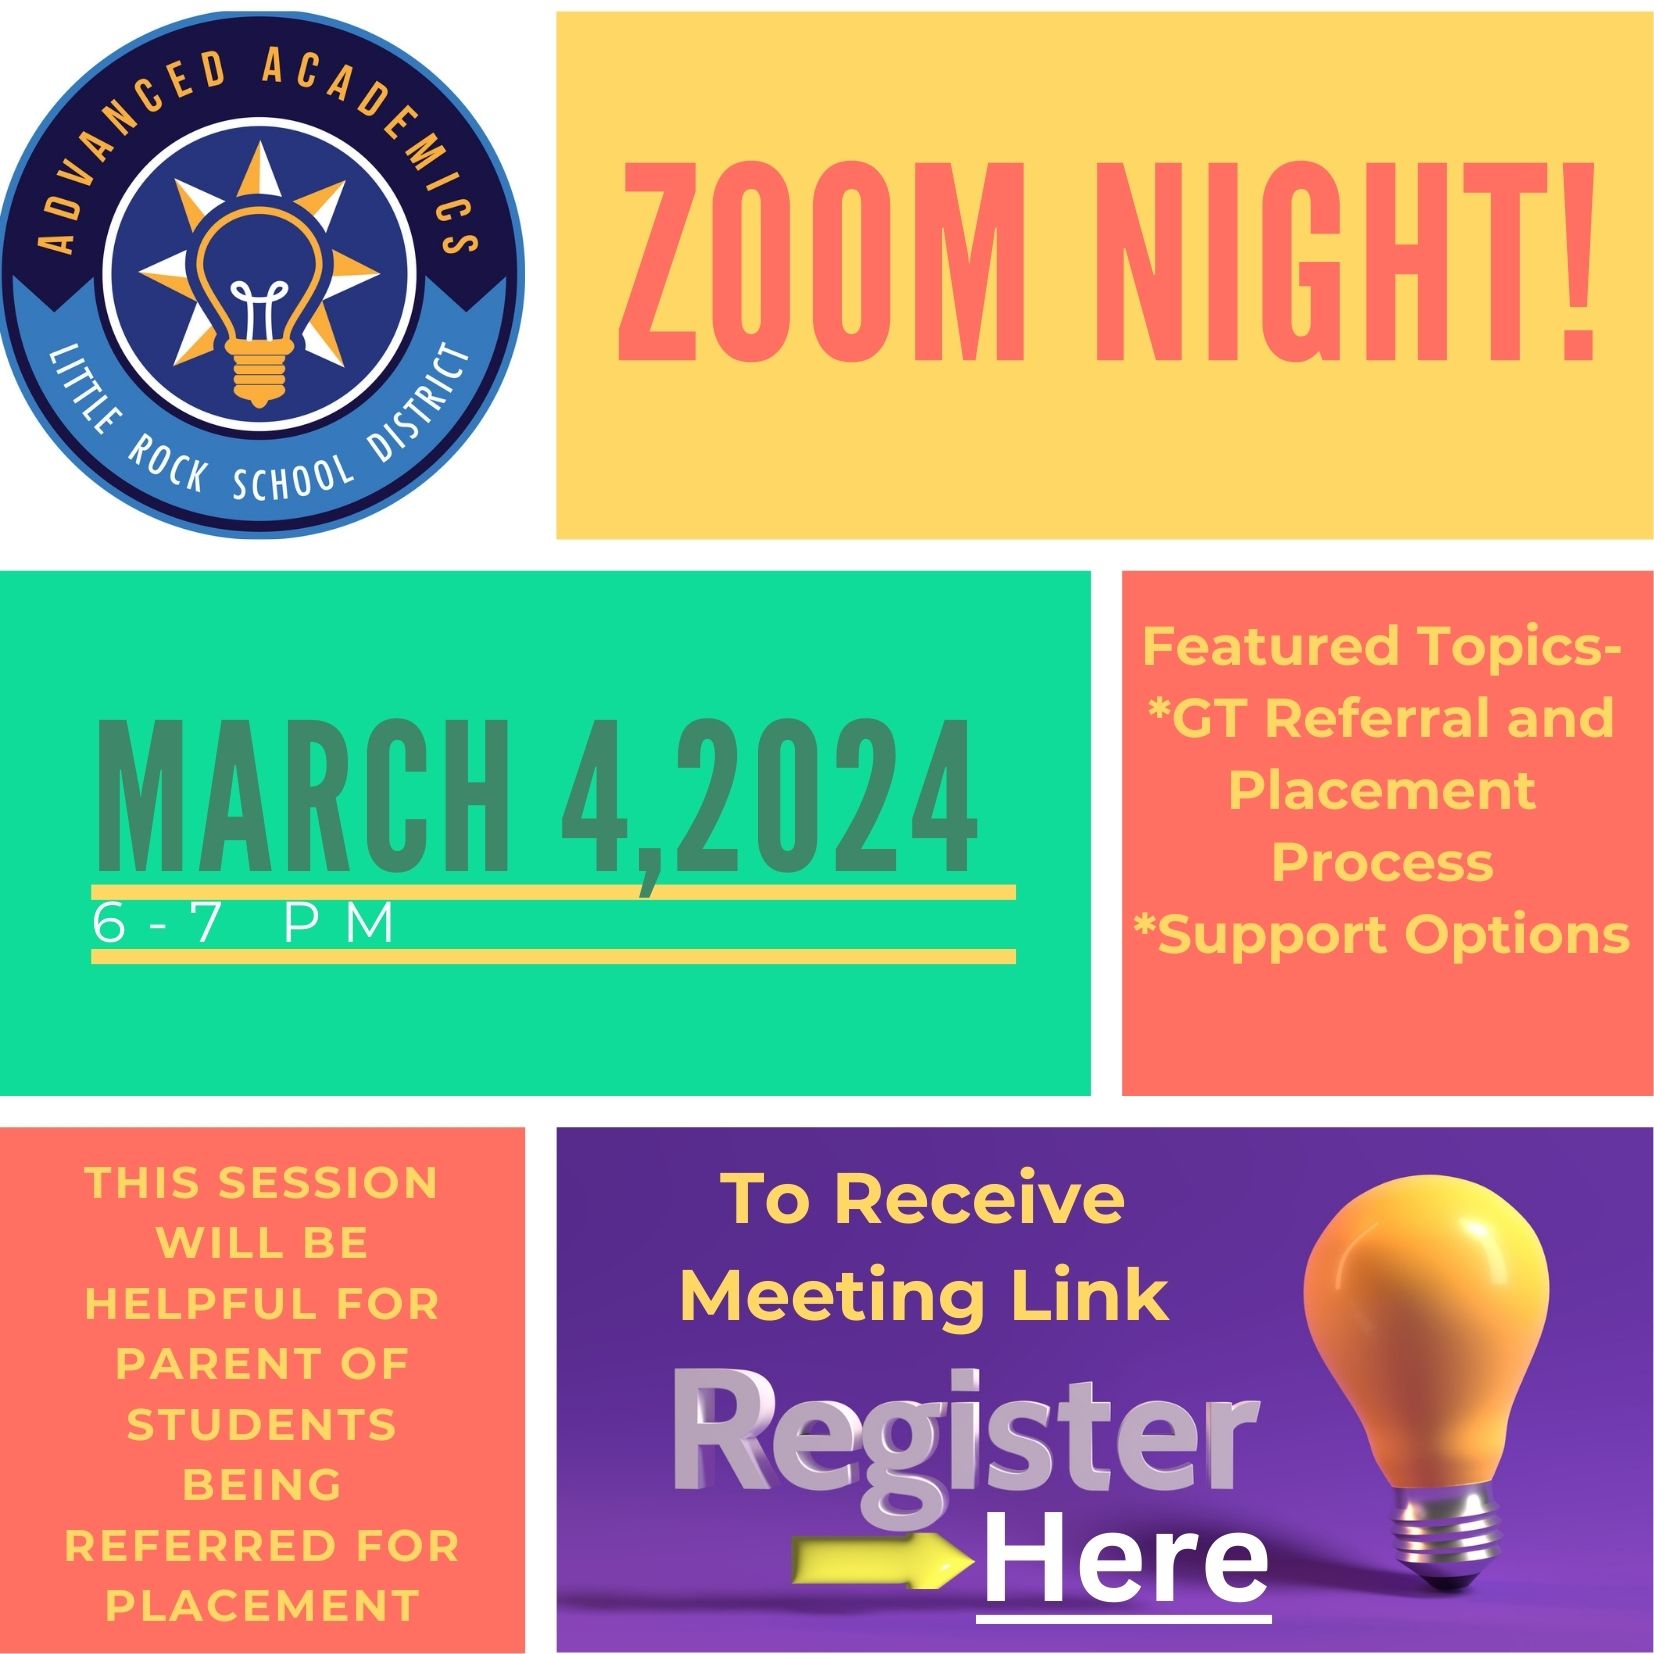 Advanced Academics Zoom Night March 4, 2024 6-7 pm Featured Topics- GT Referral and Placement Process and Support Options This session will be helpful for parents of students being referred for placement The receive the meeting link Register using the following link:    https://forms.gle/QJ6UuhXWMDD6xGMs6